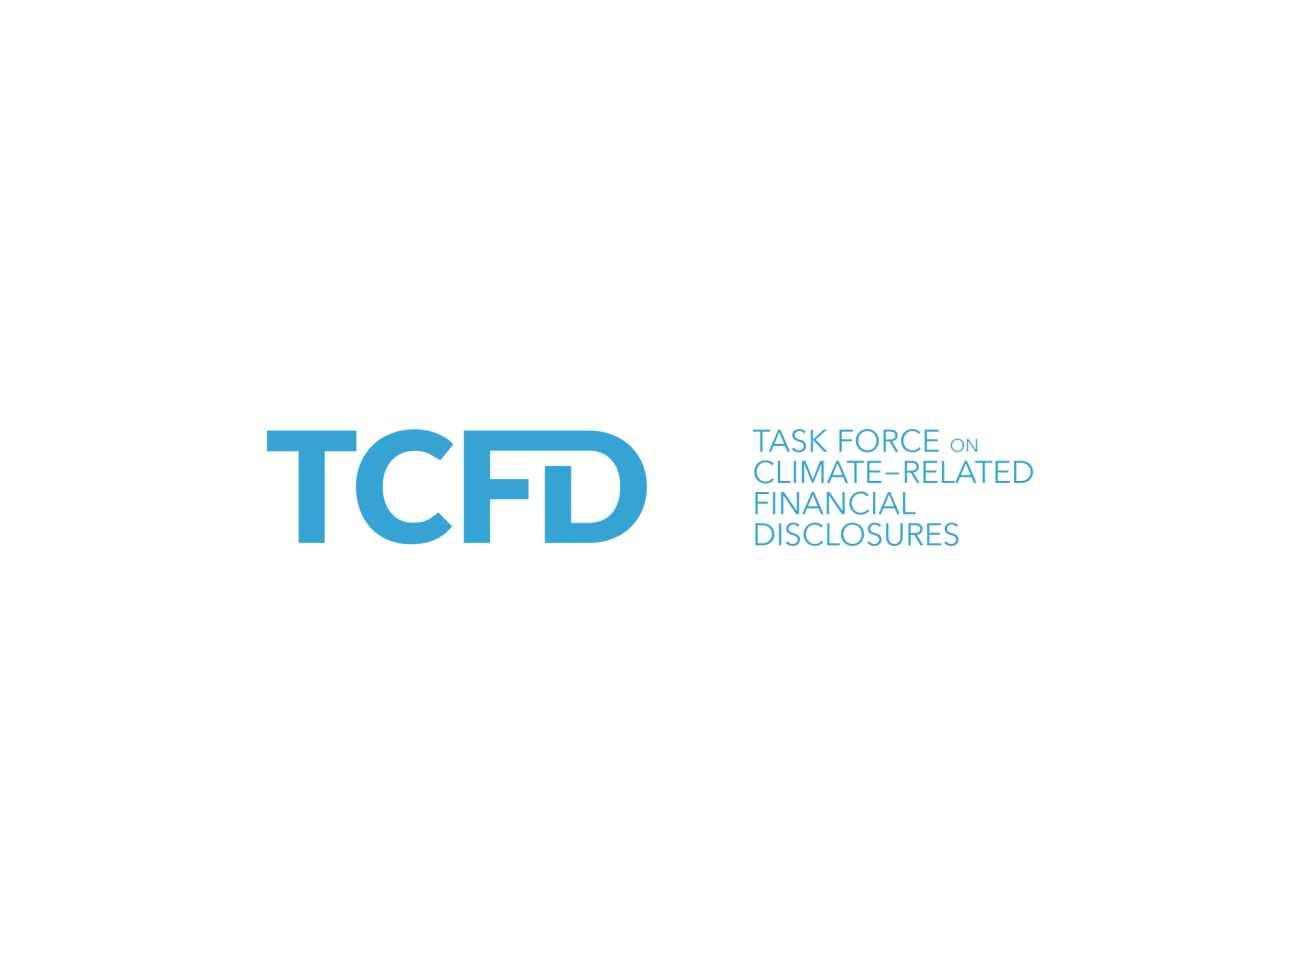 TCFD logo, blue text TCFD on the left, right side says "Task Force on Climate-Related Financial Disclosures"